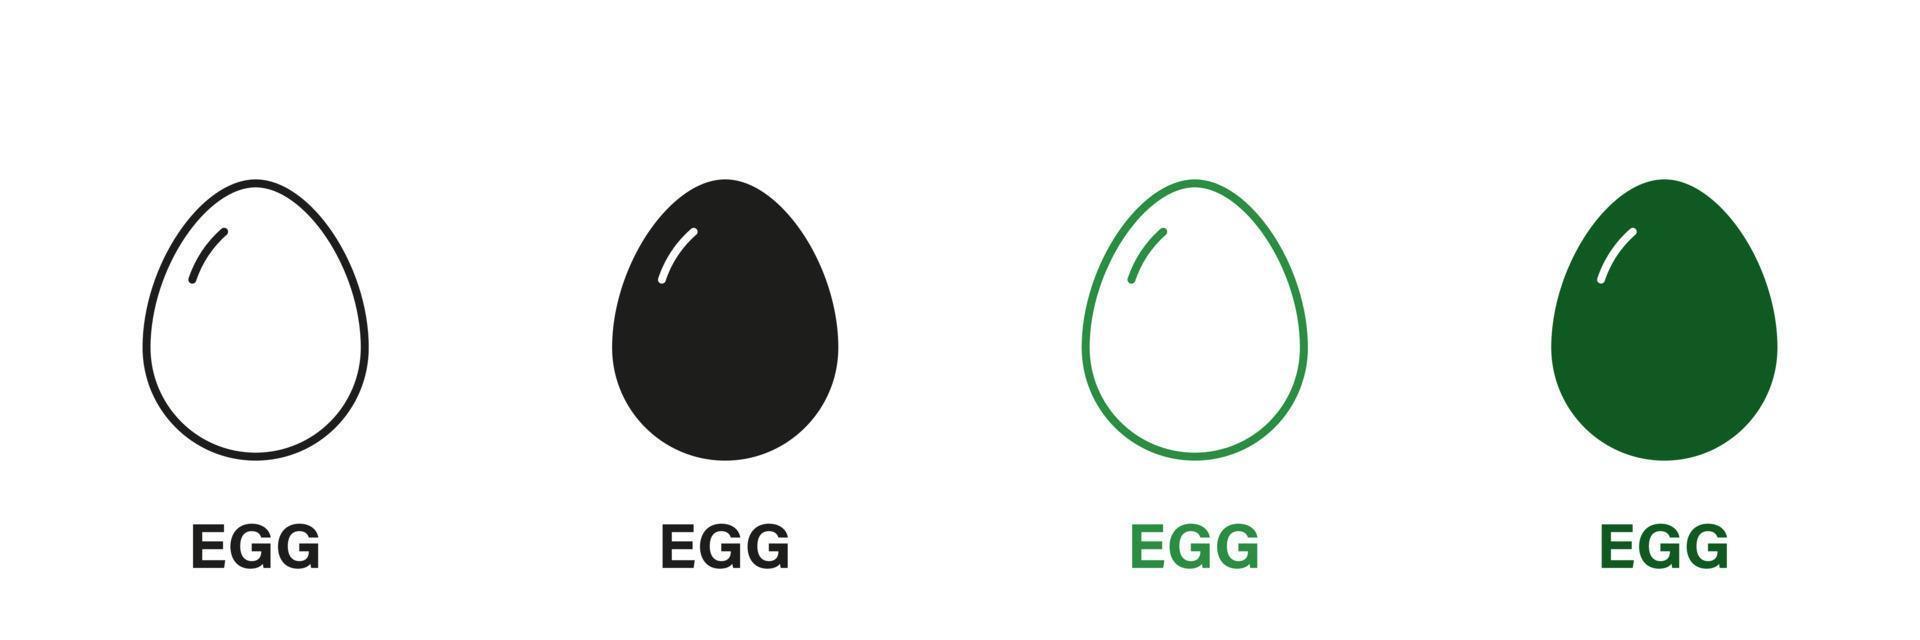 Egg Line and Silhouette Icon Set. Healthy Breakfast Green and Black Pictogram. Protein Diet, Eggshell Symbol Collection on White Background. Nutrition Sign. Isolated Vector Illustration.